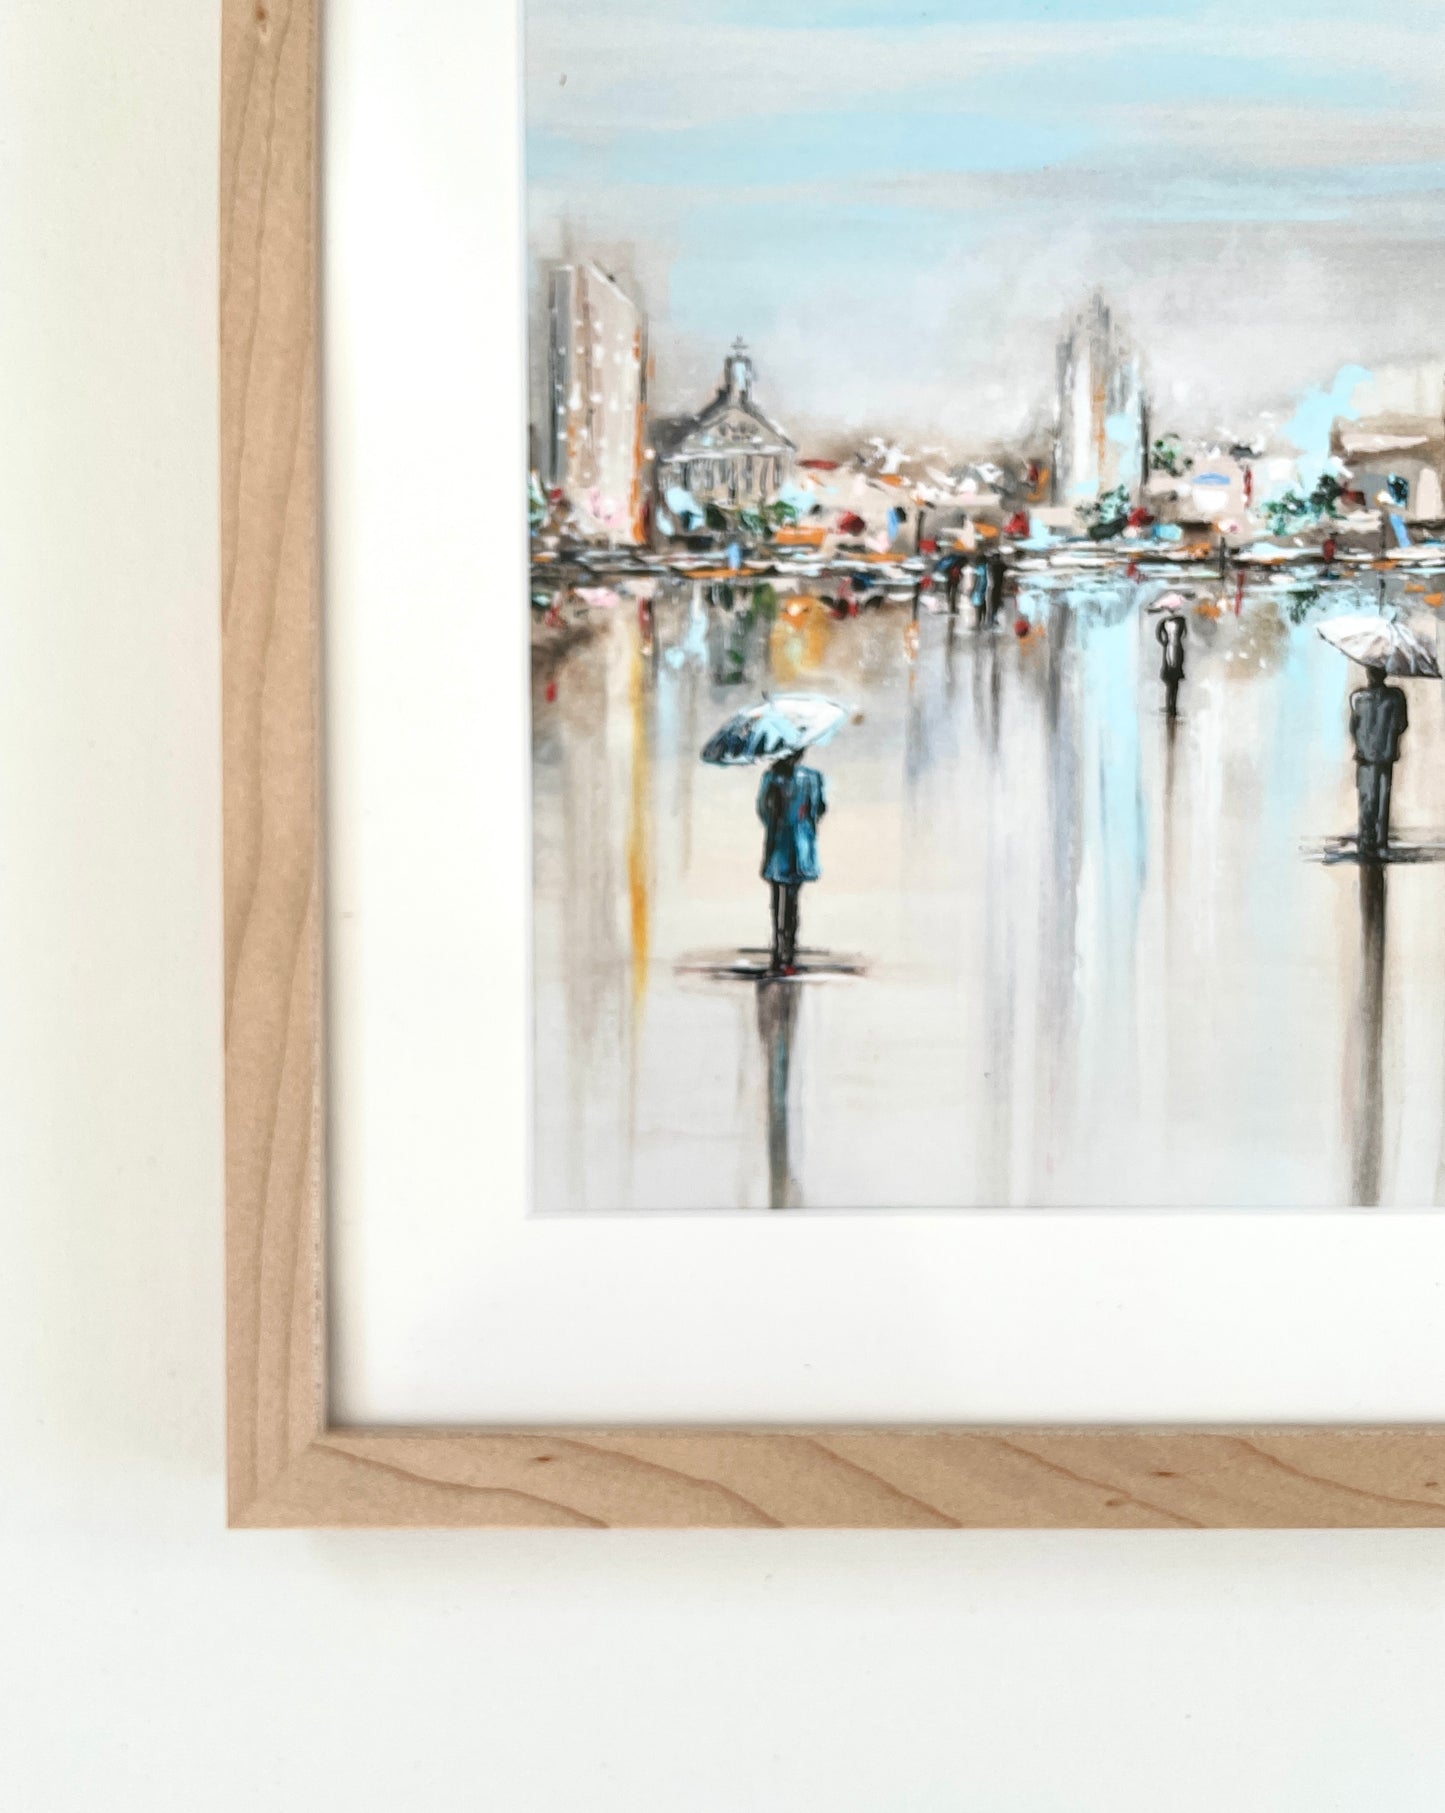 "A Moment in Time" FRAMED GICLEE PRINT Art Abstract Painting Cityscape Horizon Modern Figurative Umbrellas